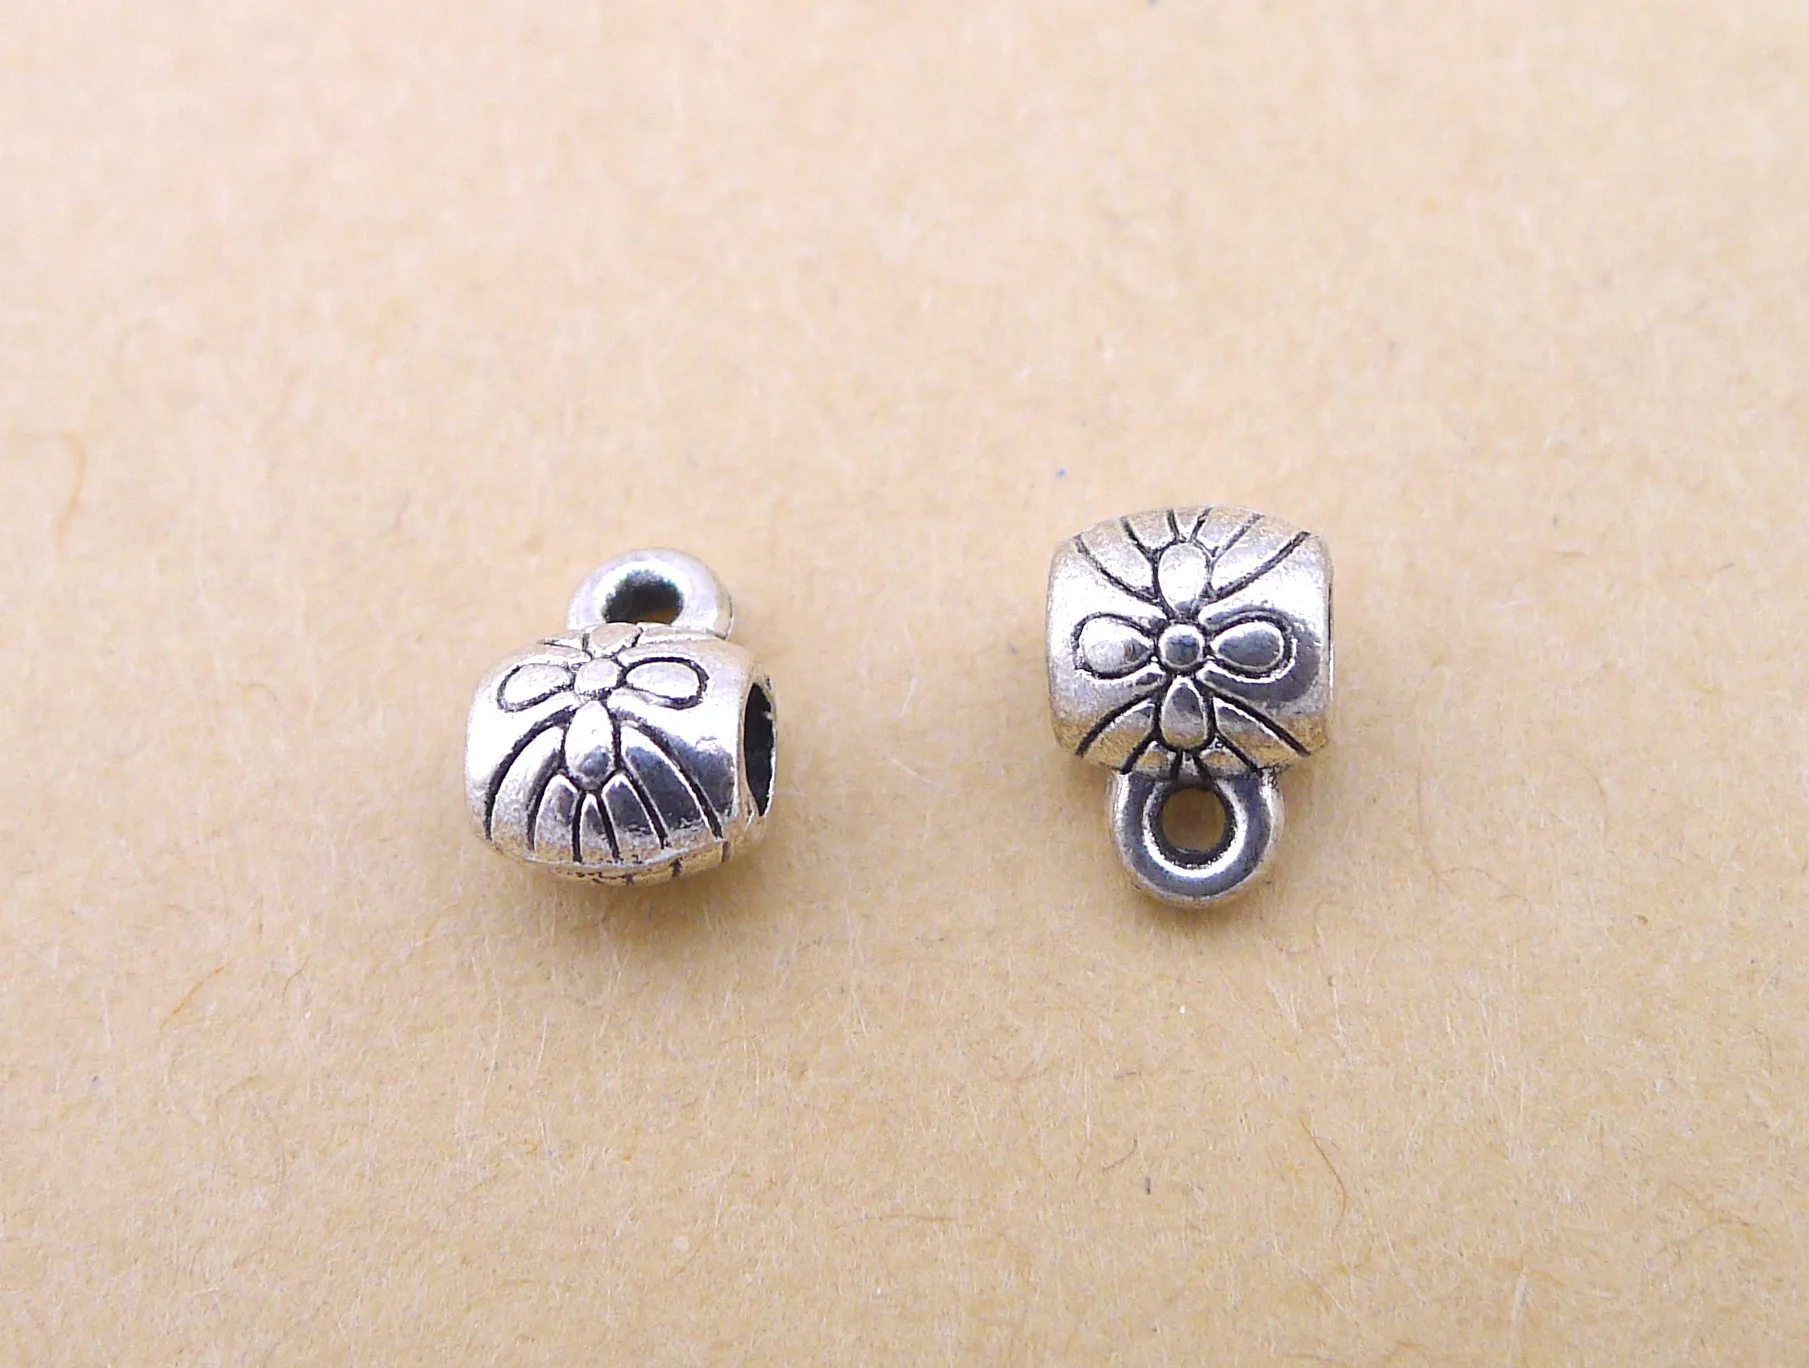 Handmade Earrings Charms Diy Accessories For Jewelry Pendant Bracelet 20pcs 6x8mm Antique Silver Color Pendant Buckle Bail Beads